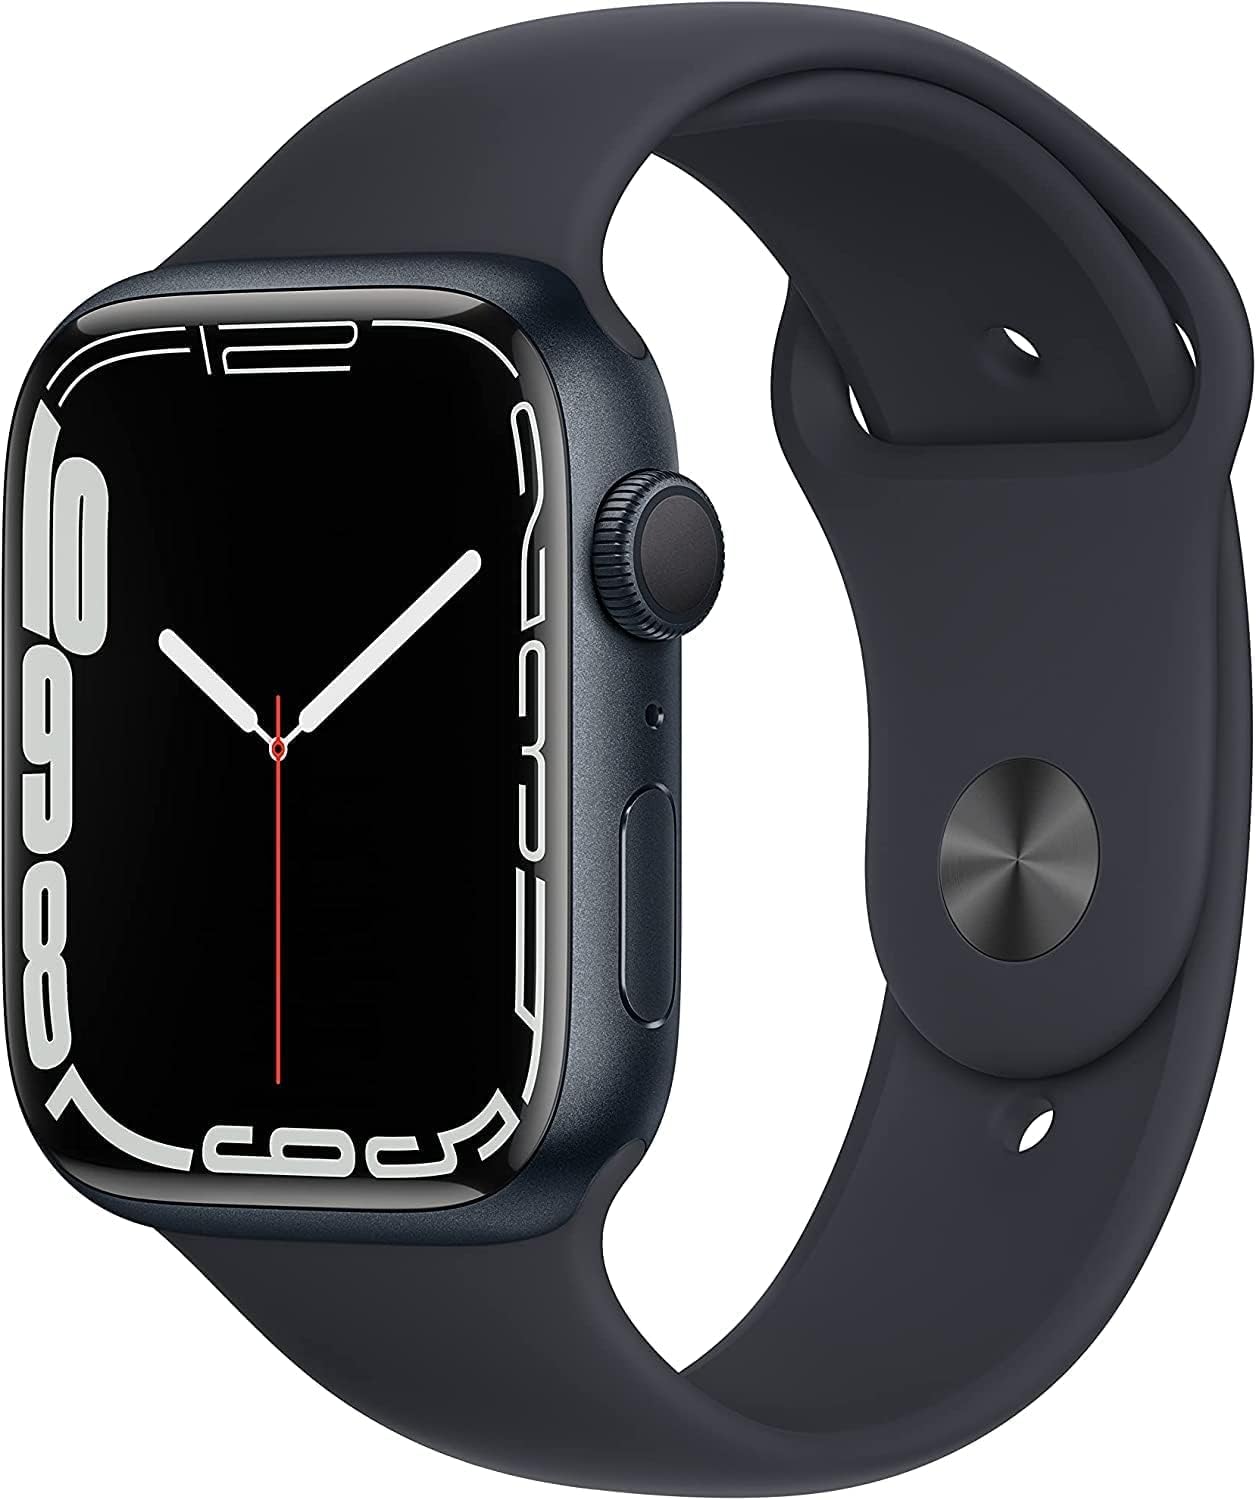 Apple Watch Series 7 Review: A Feature-Packed Smartwatch for Enhanced Daily Life